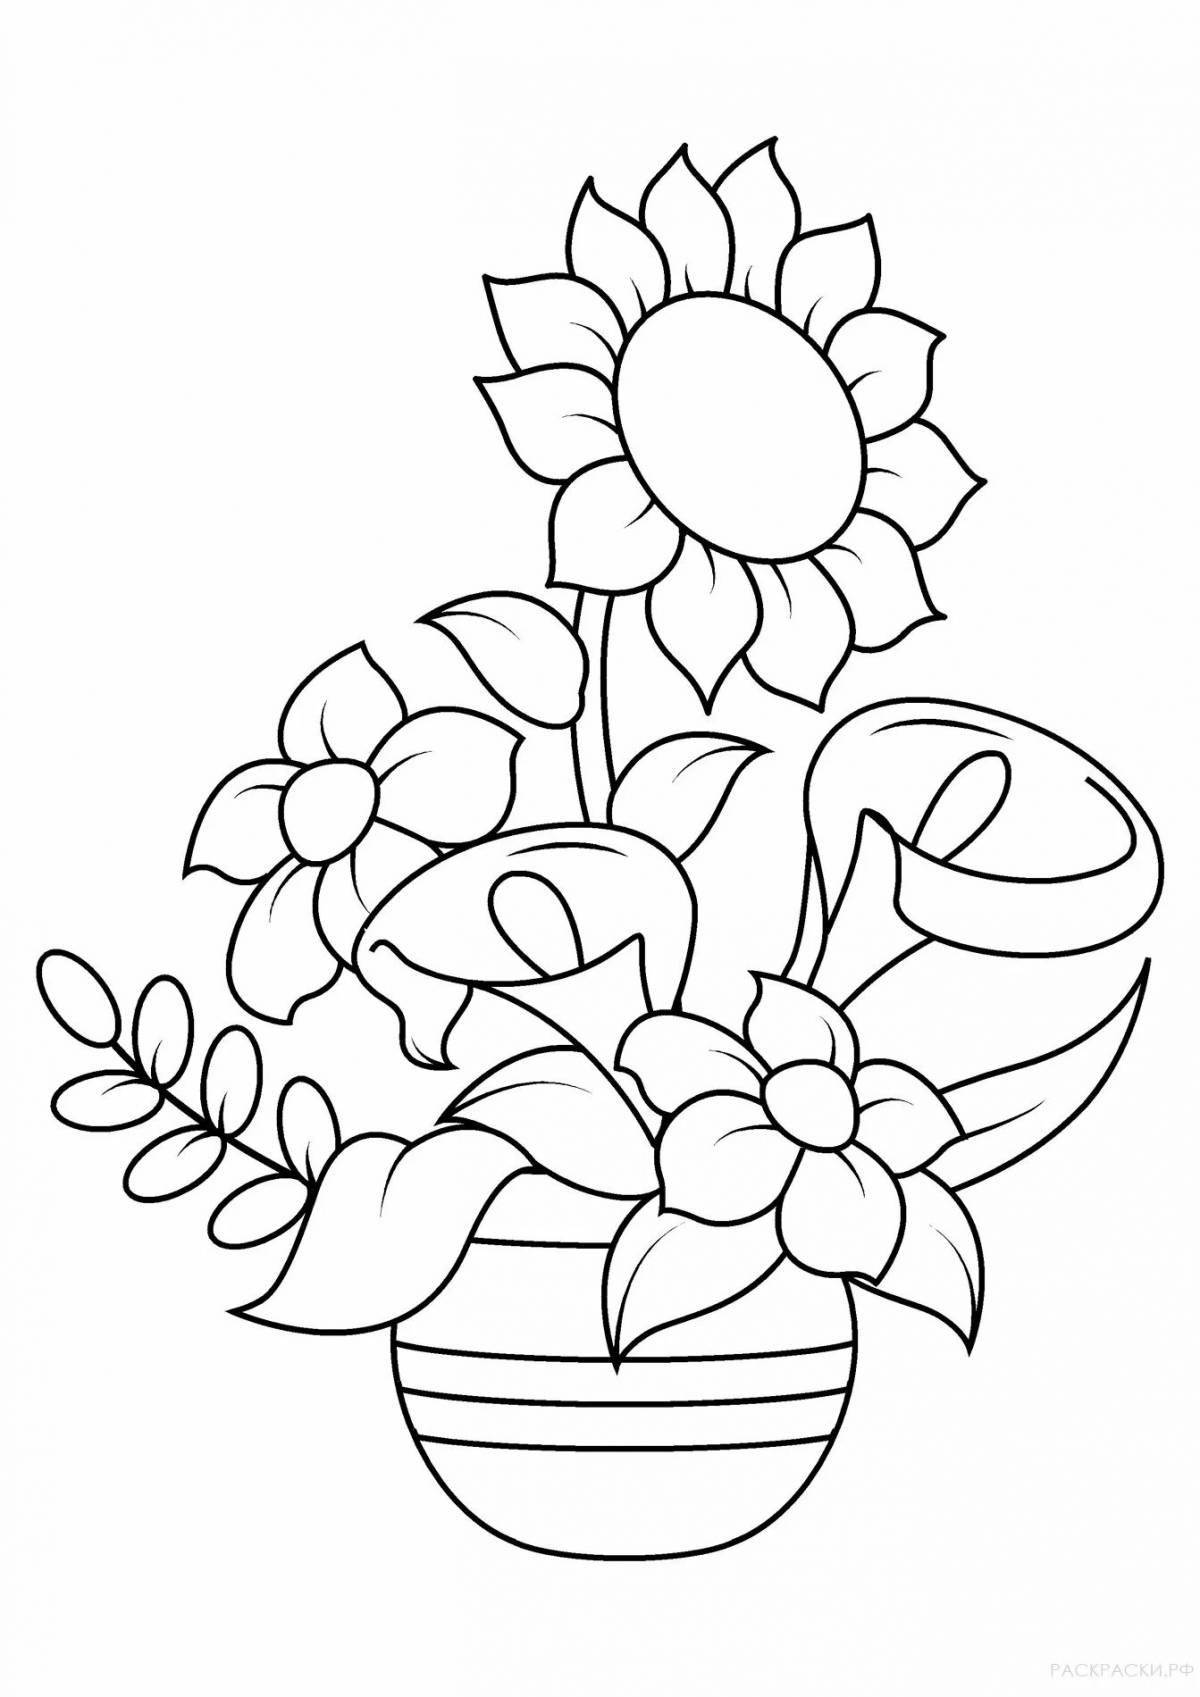 Refreshing bouquet of flowers in a vase coloring book